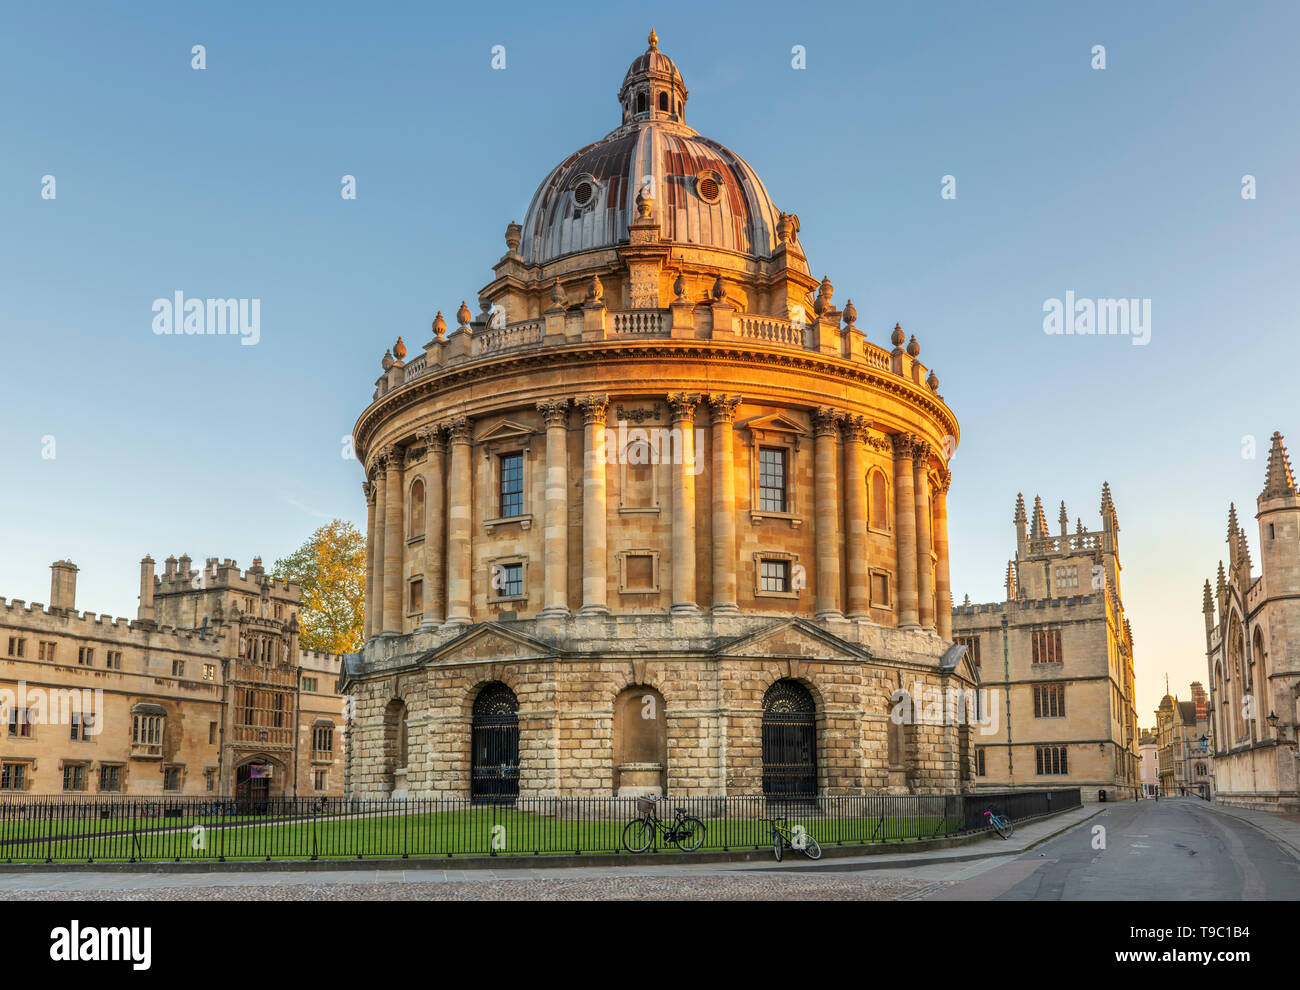 The Radcliffe Camera is a building of Oxford University, designed by James Gibbs in the neo-classical style. The famous landmark building in the centr Stock Photo